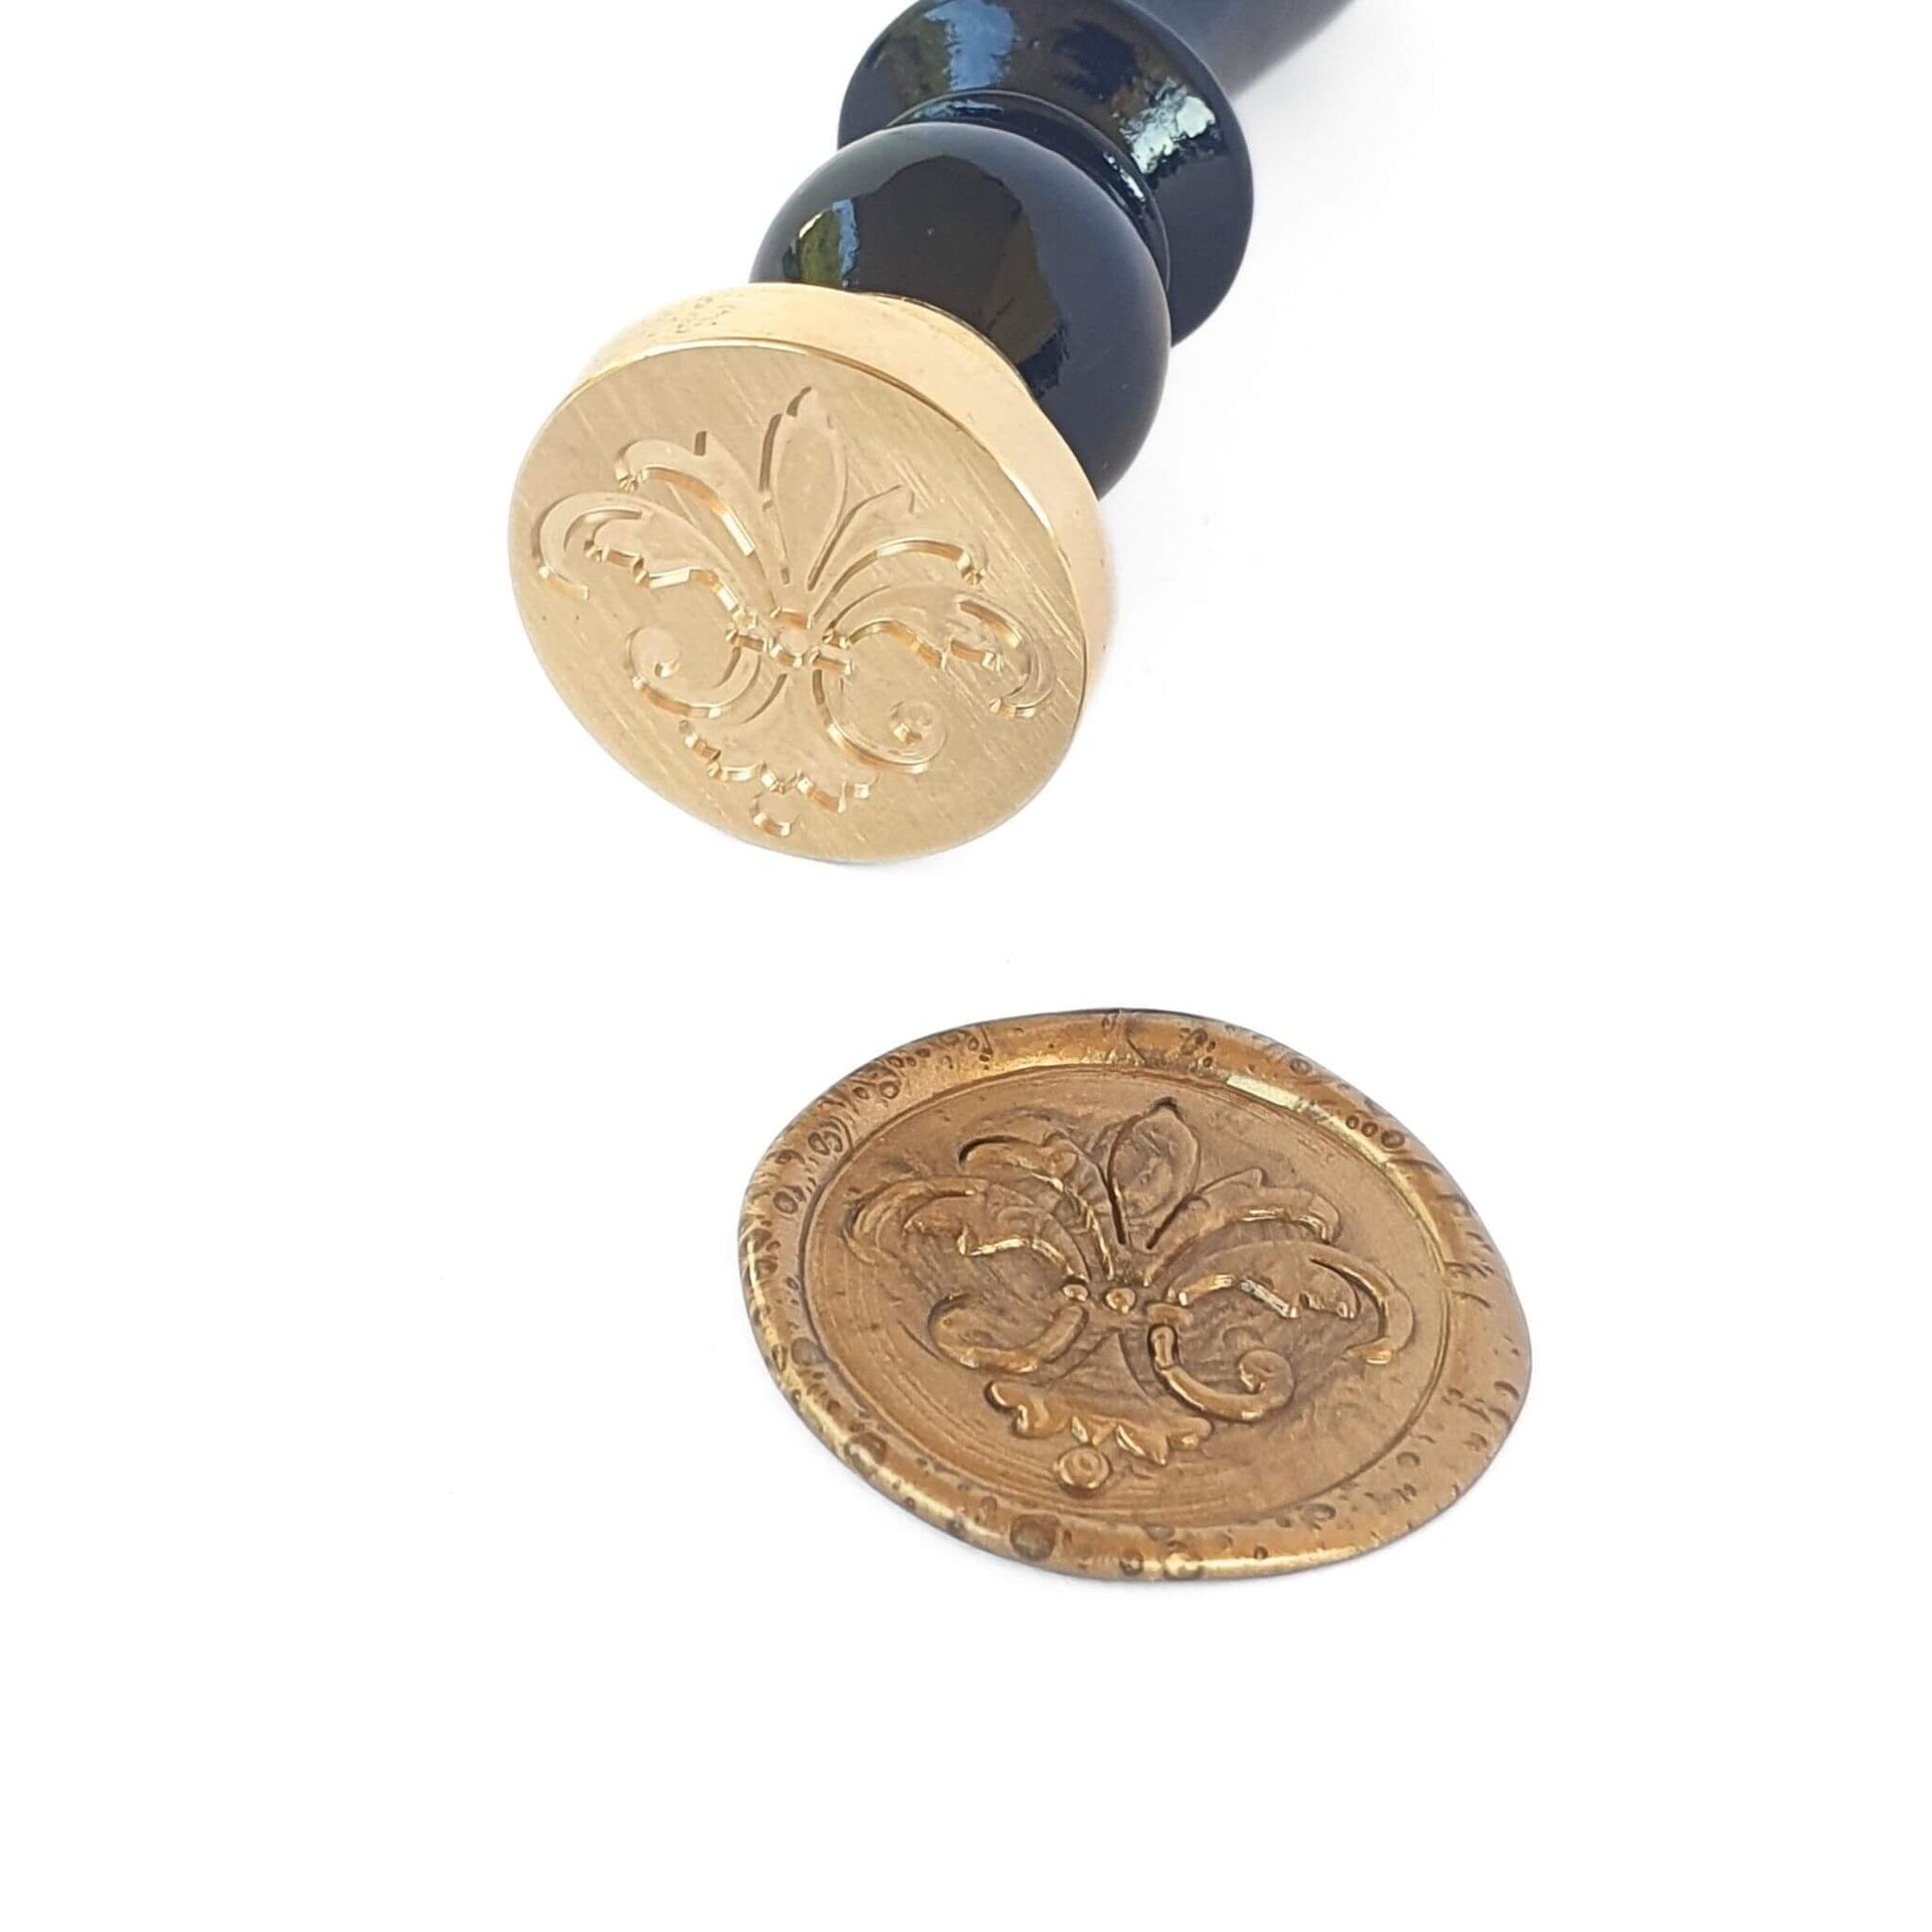 Florentine fleur de lis symbol engraved on brass wax seal with black wood handle next to antique gold wax seal